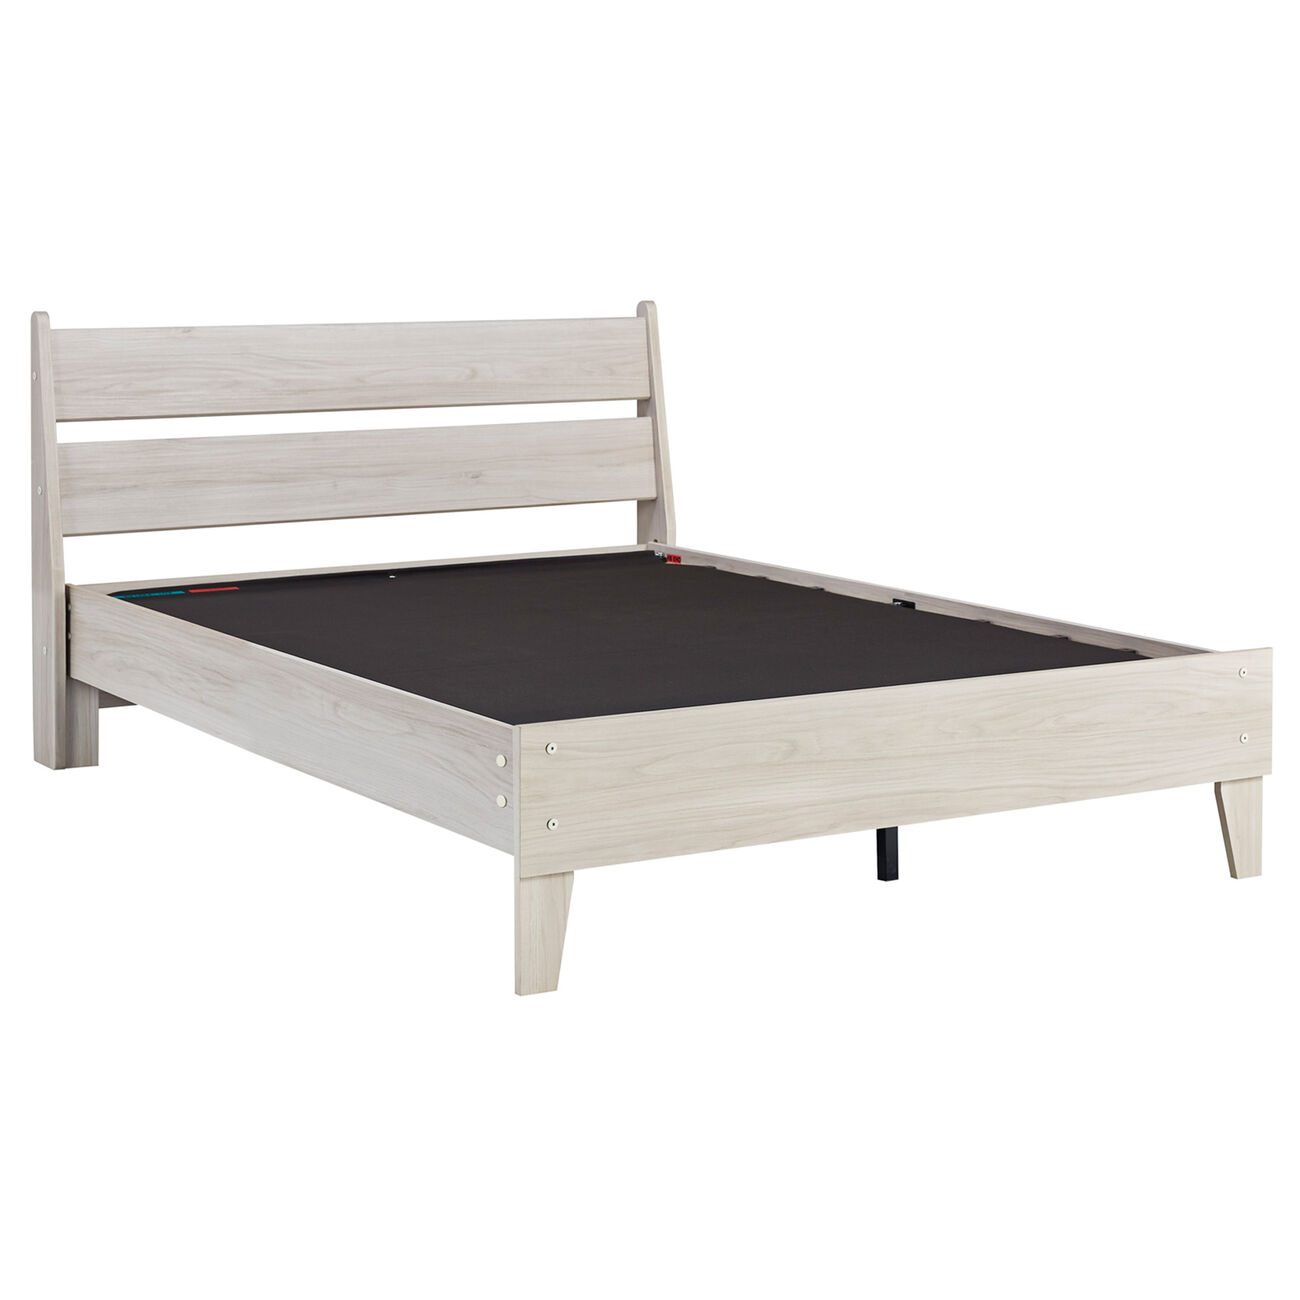 Wooden Full Platform Bed with Grains, Off White